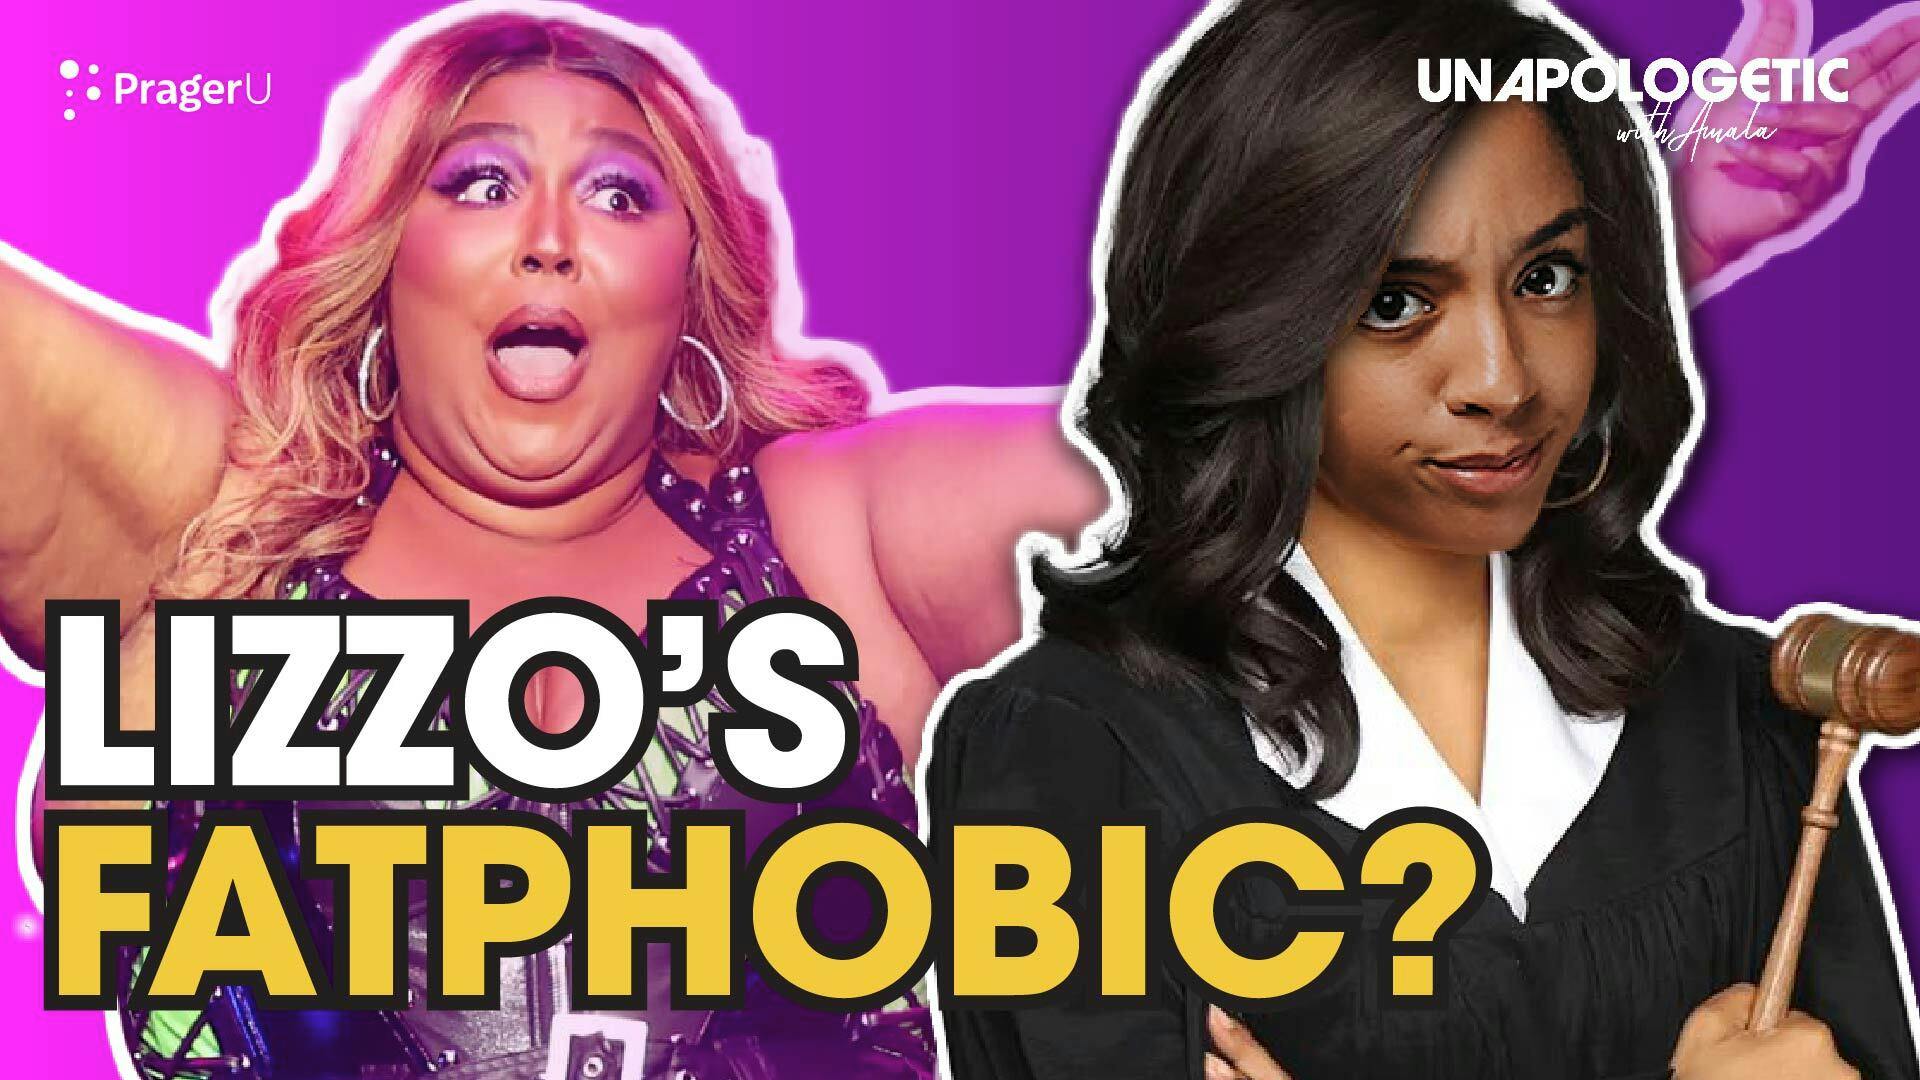 Let's Talk about the Lizzo Lawsuit